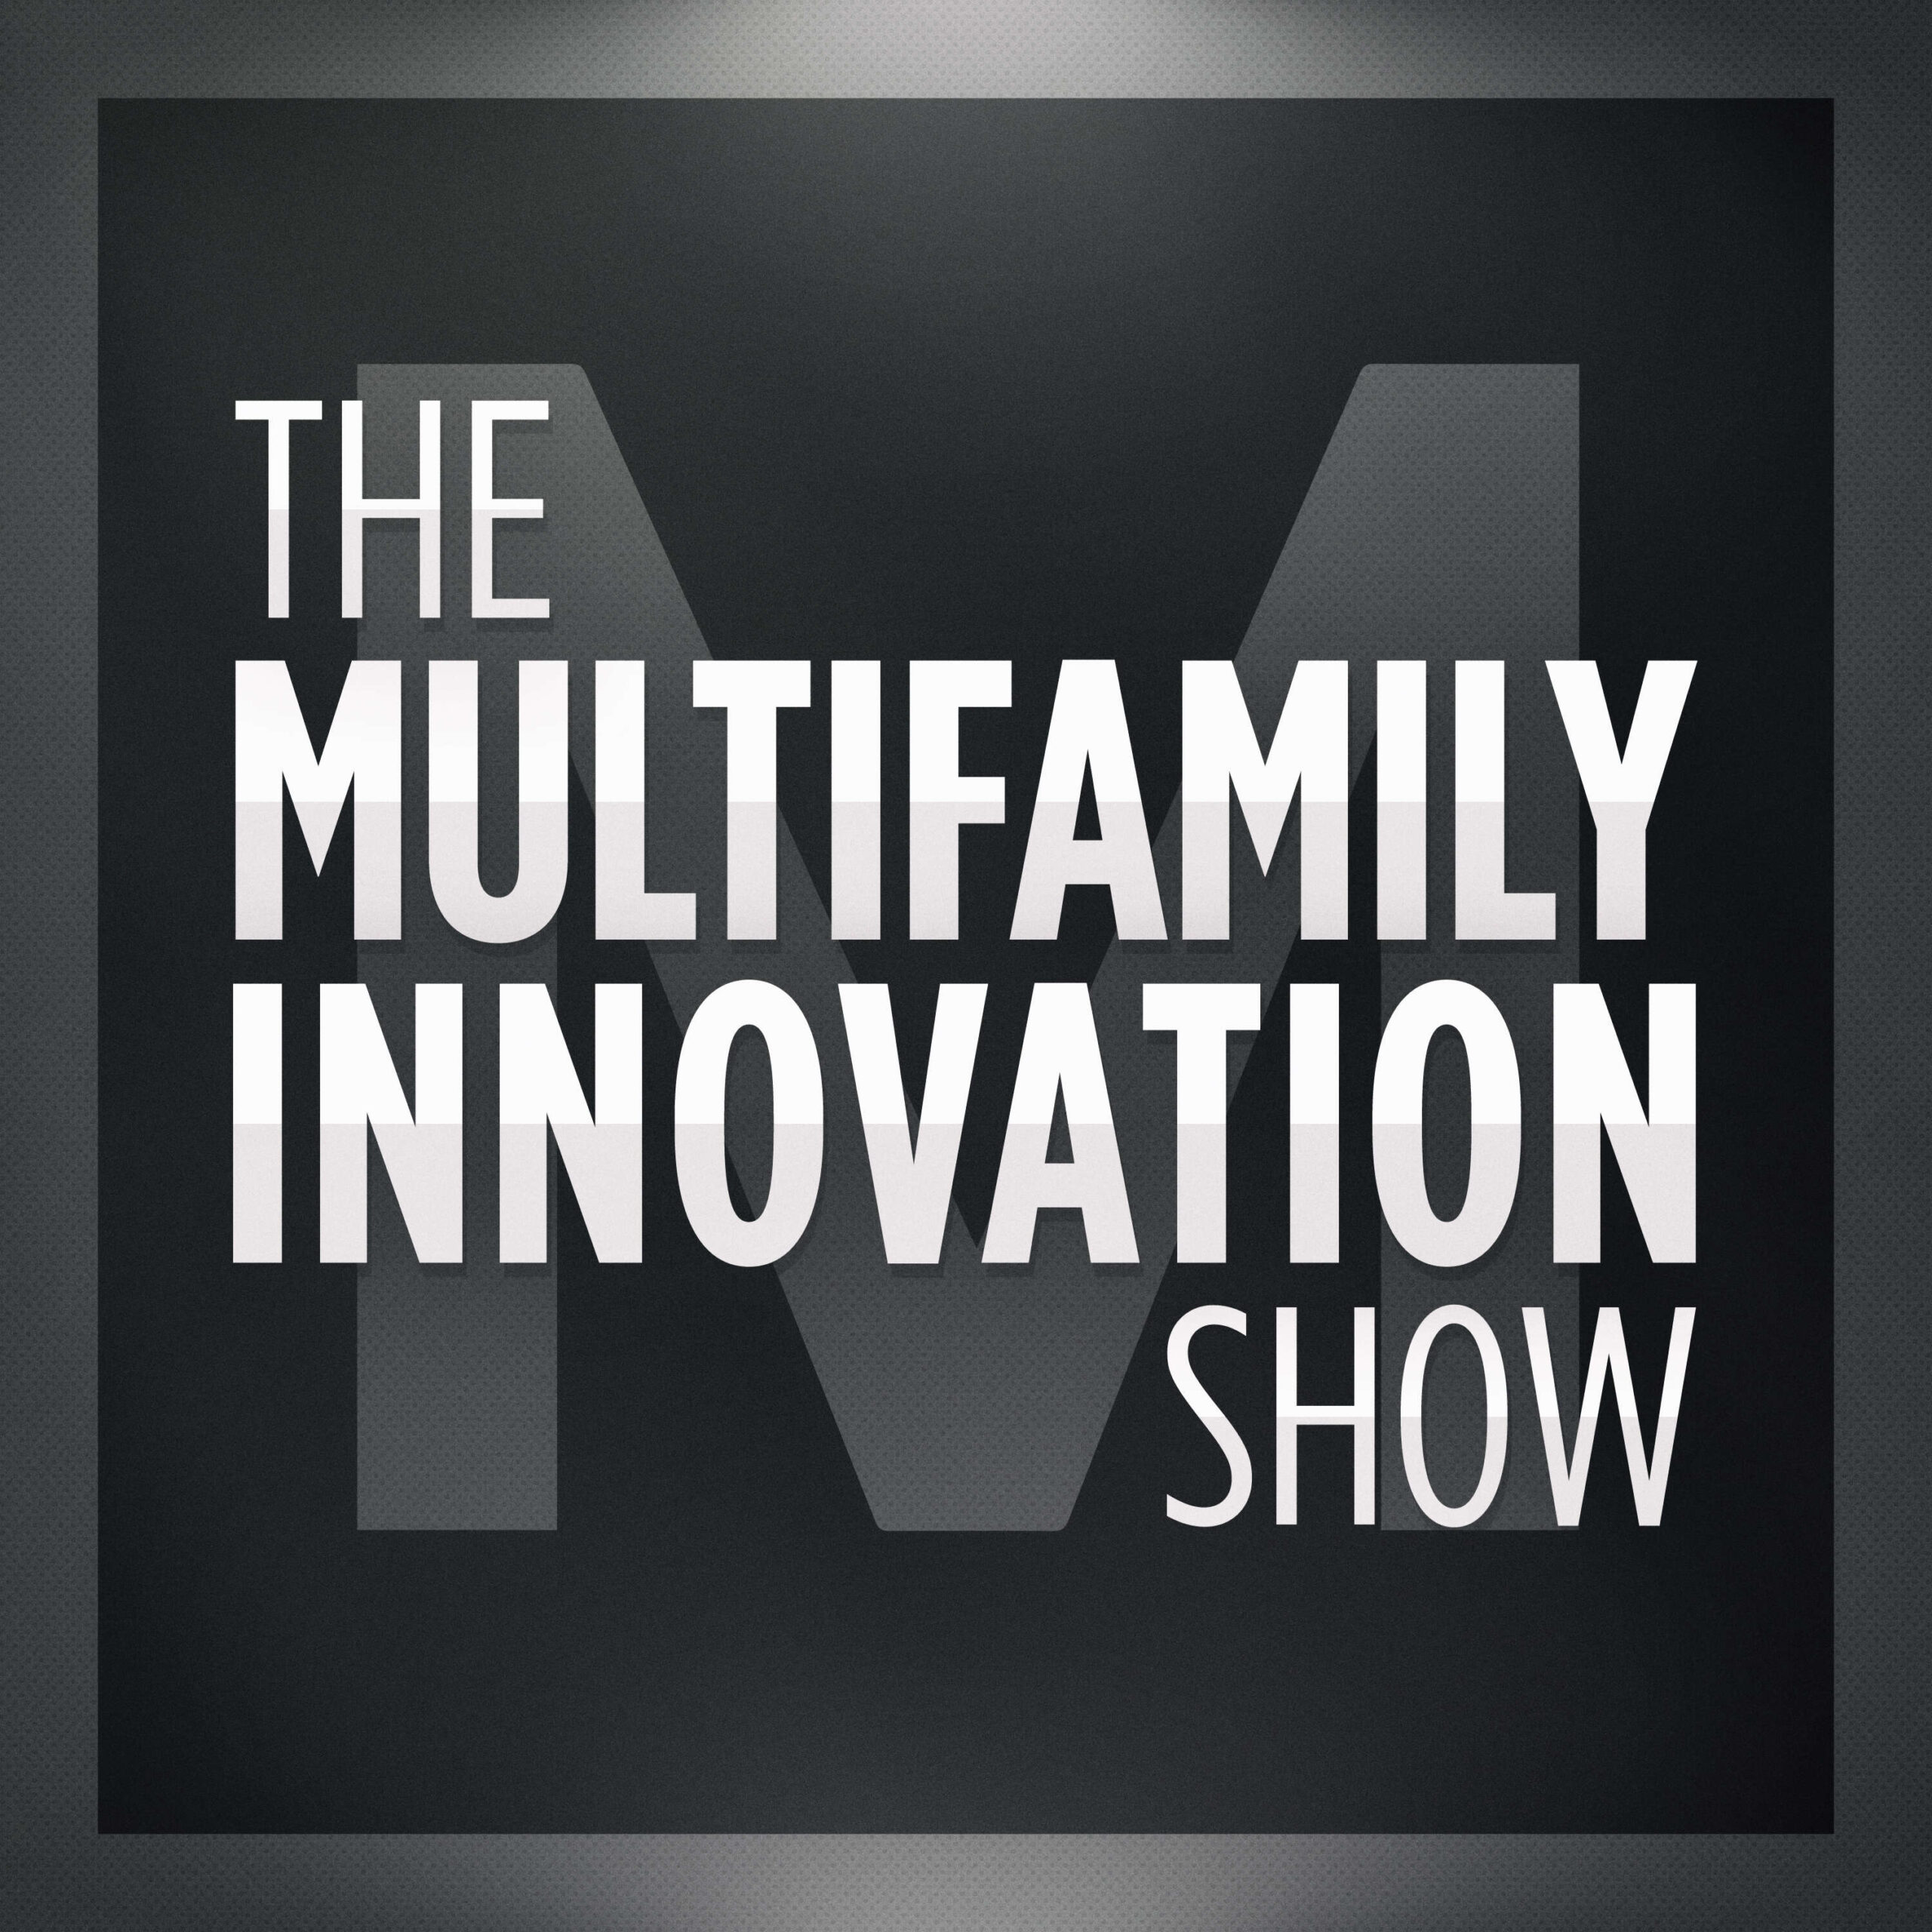 Talent, the last real Competitive Advantage in Multifamily